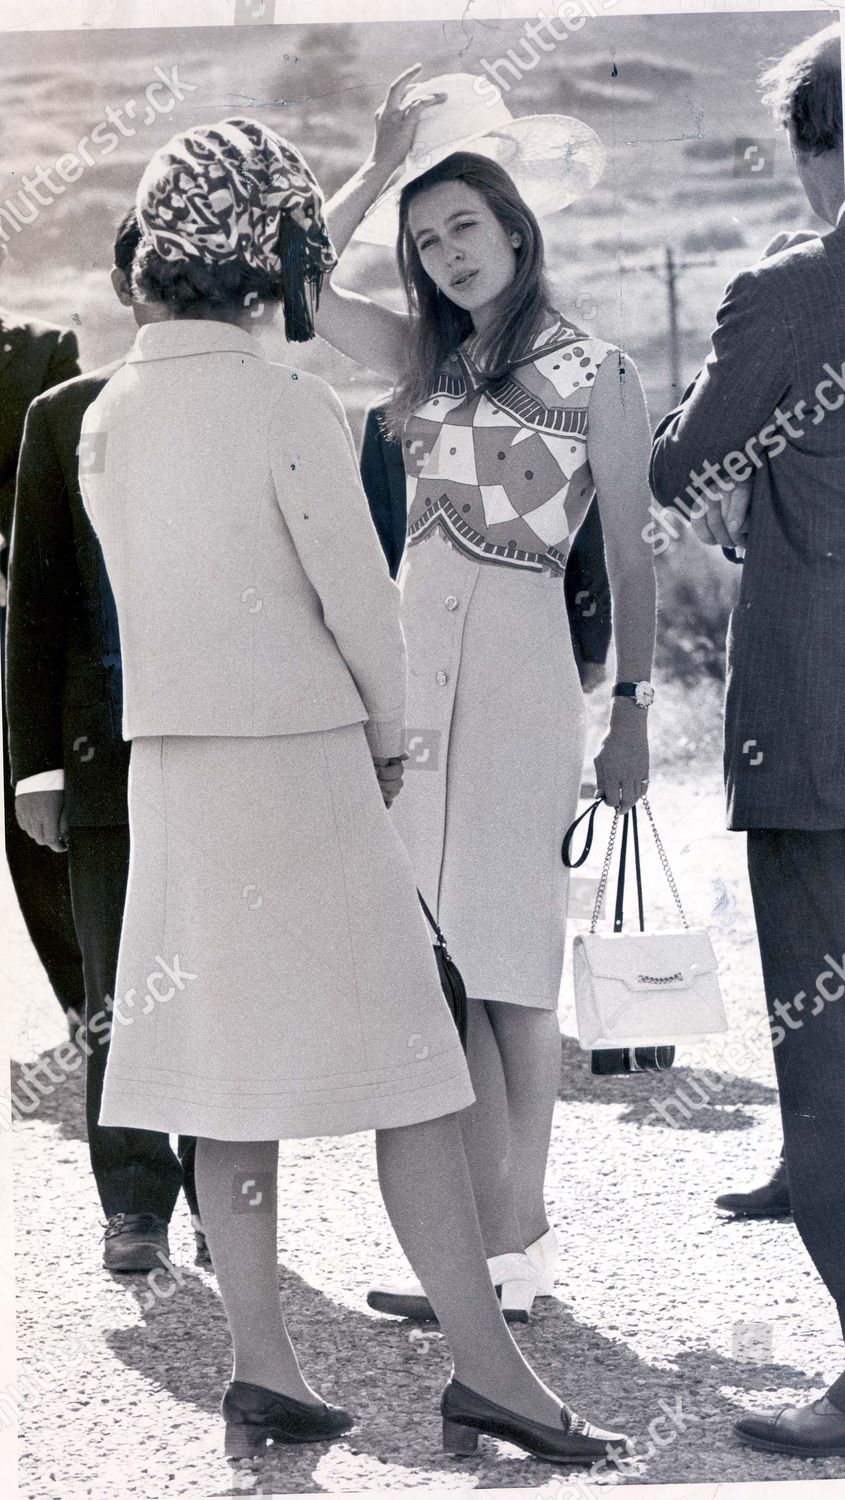 princess-anne-now-princess-royal-1971-picture-shows-princess-anne-at-ephesus-turkey-she-is-viewing-the-ruins-at-ephesus-from-beneath-a-wide-brimmed-hat-shutterstock-editorial-896312a.jpg